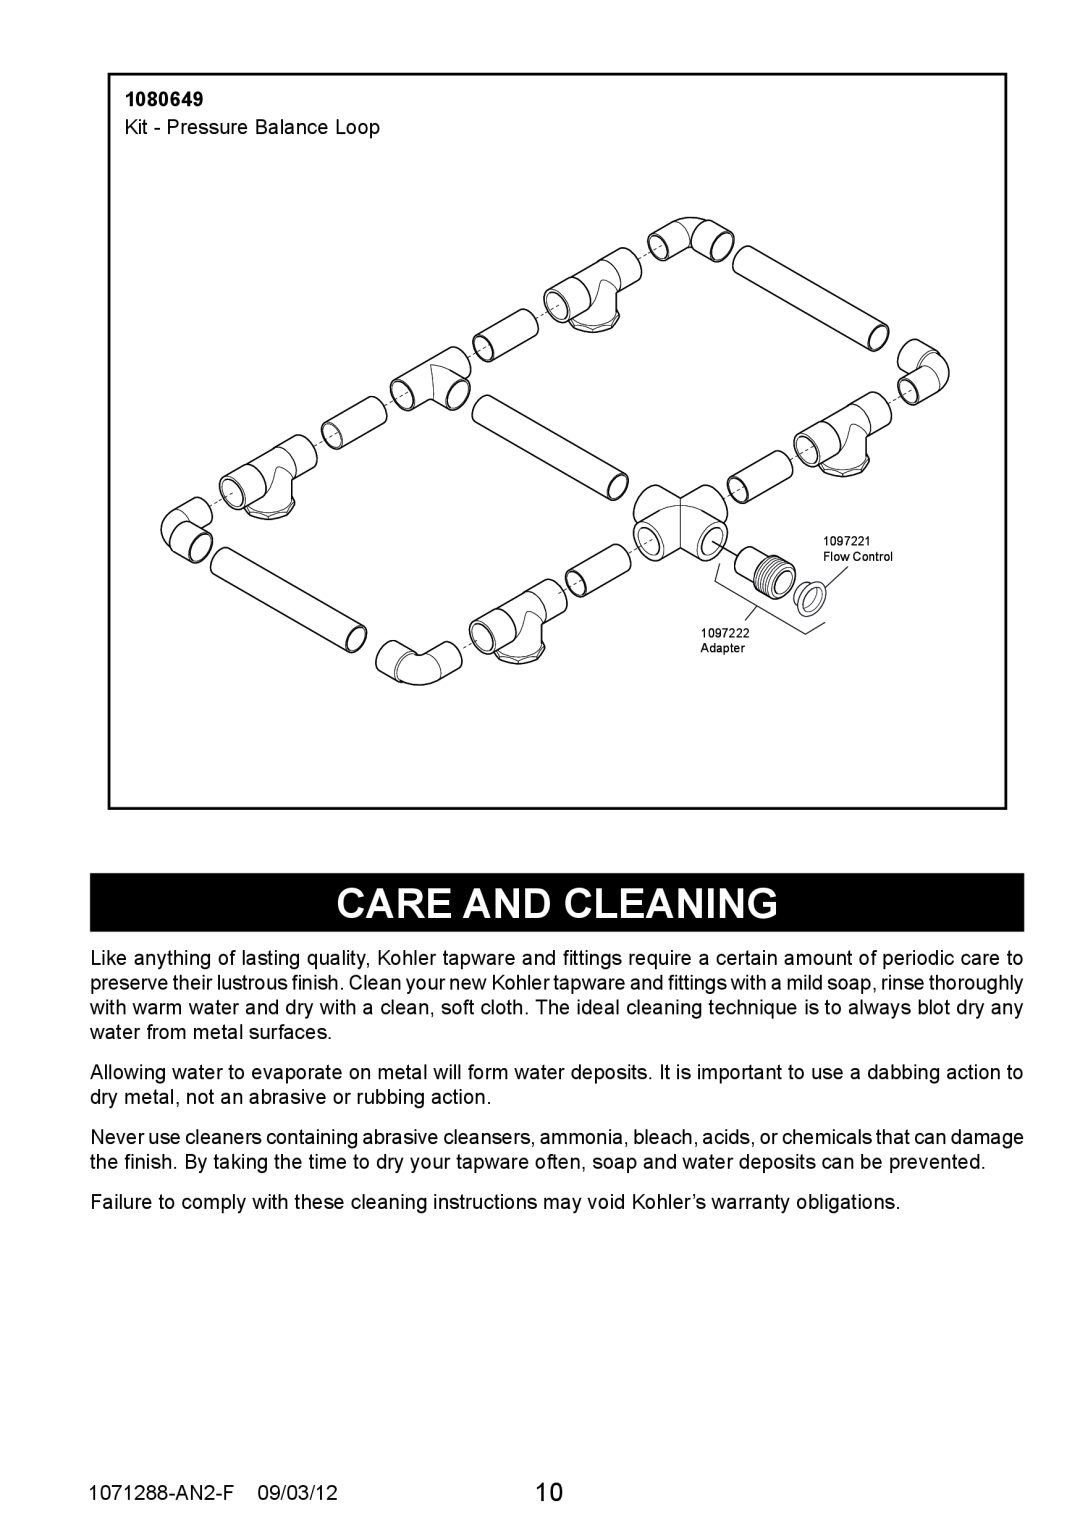 Kohler 8030A manual Care And Cleaning, 1080649 